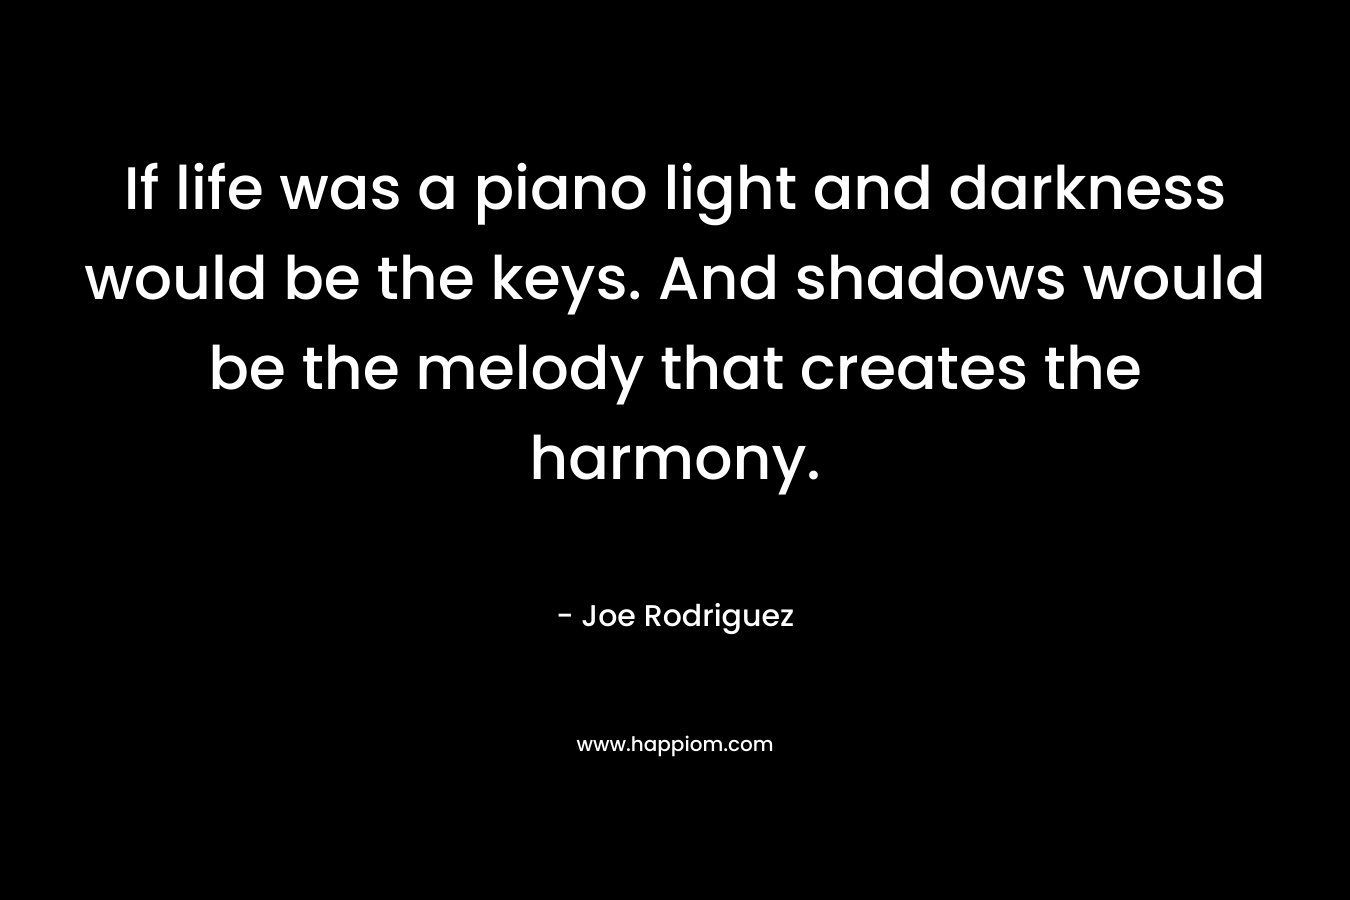 If life was a piano light and darkness would be the keys. And shadows would be the melody that creates the harmony.